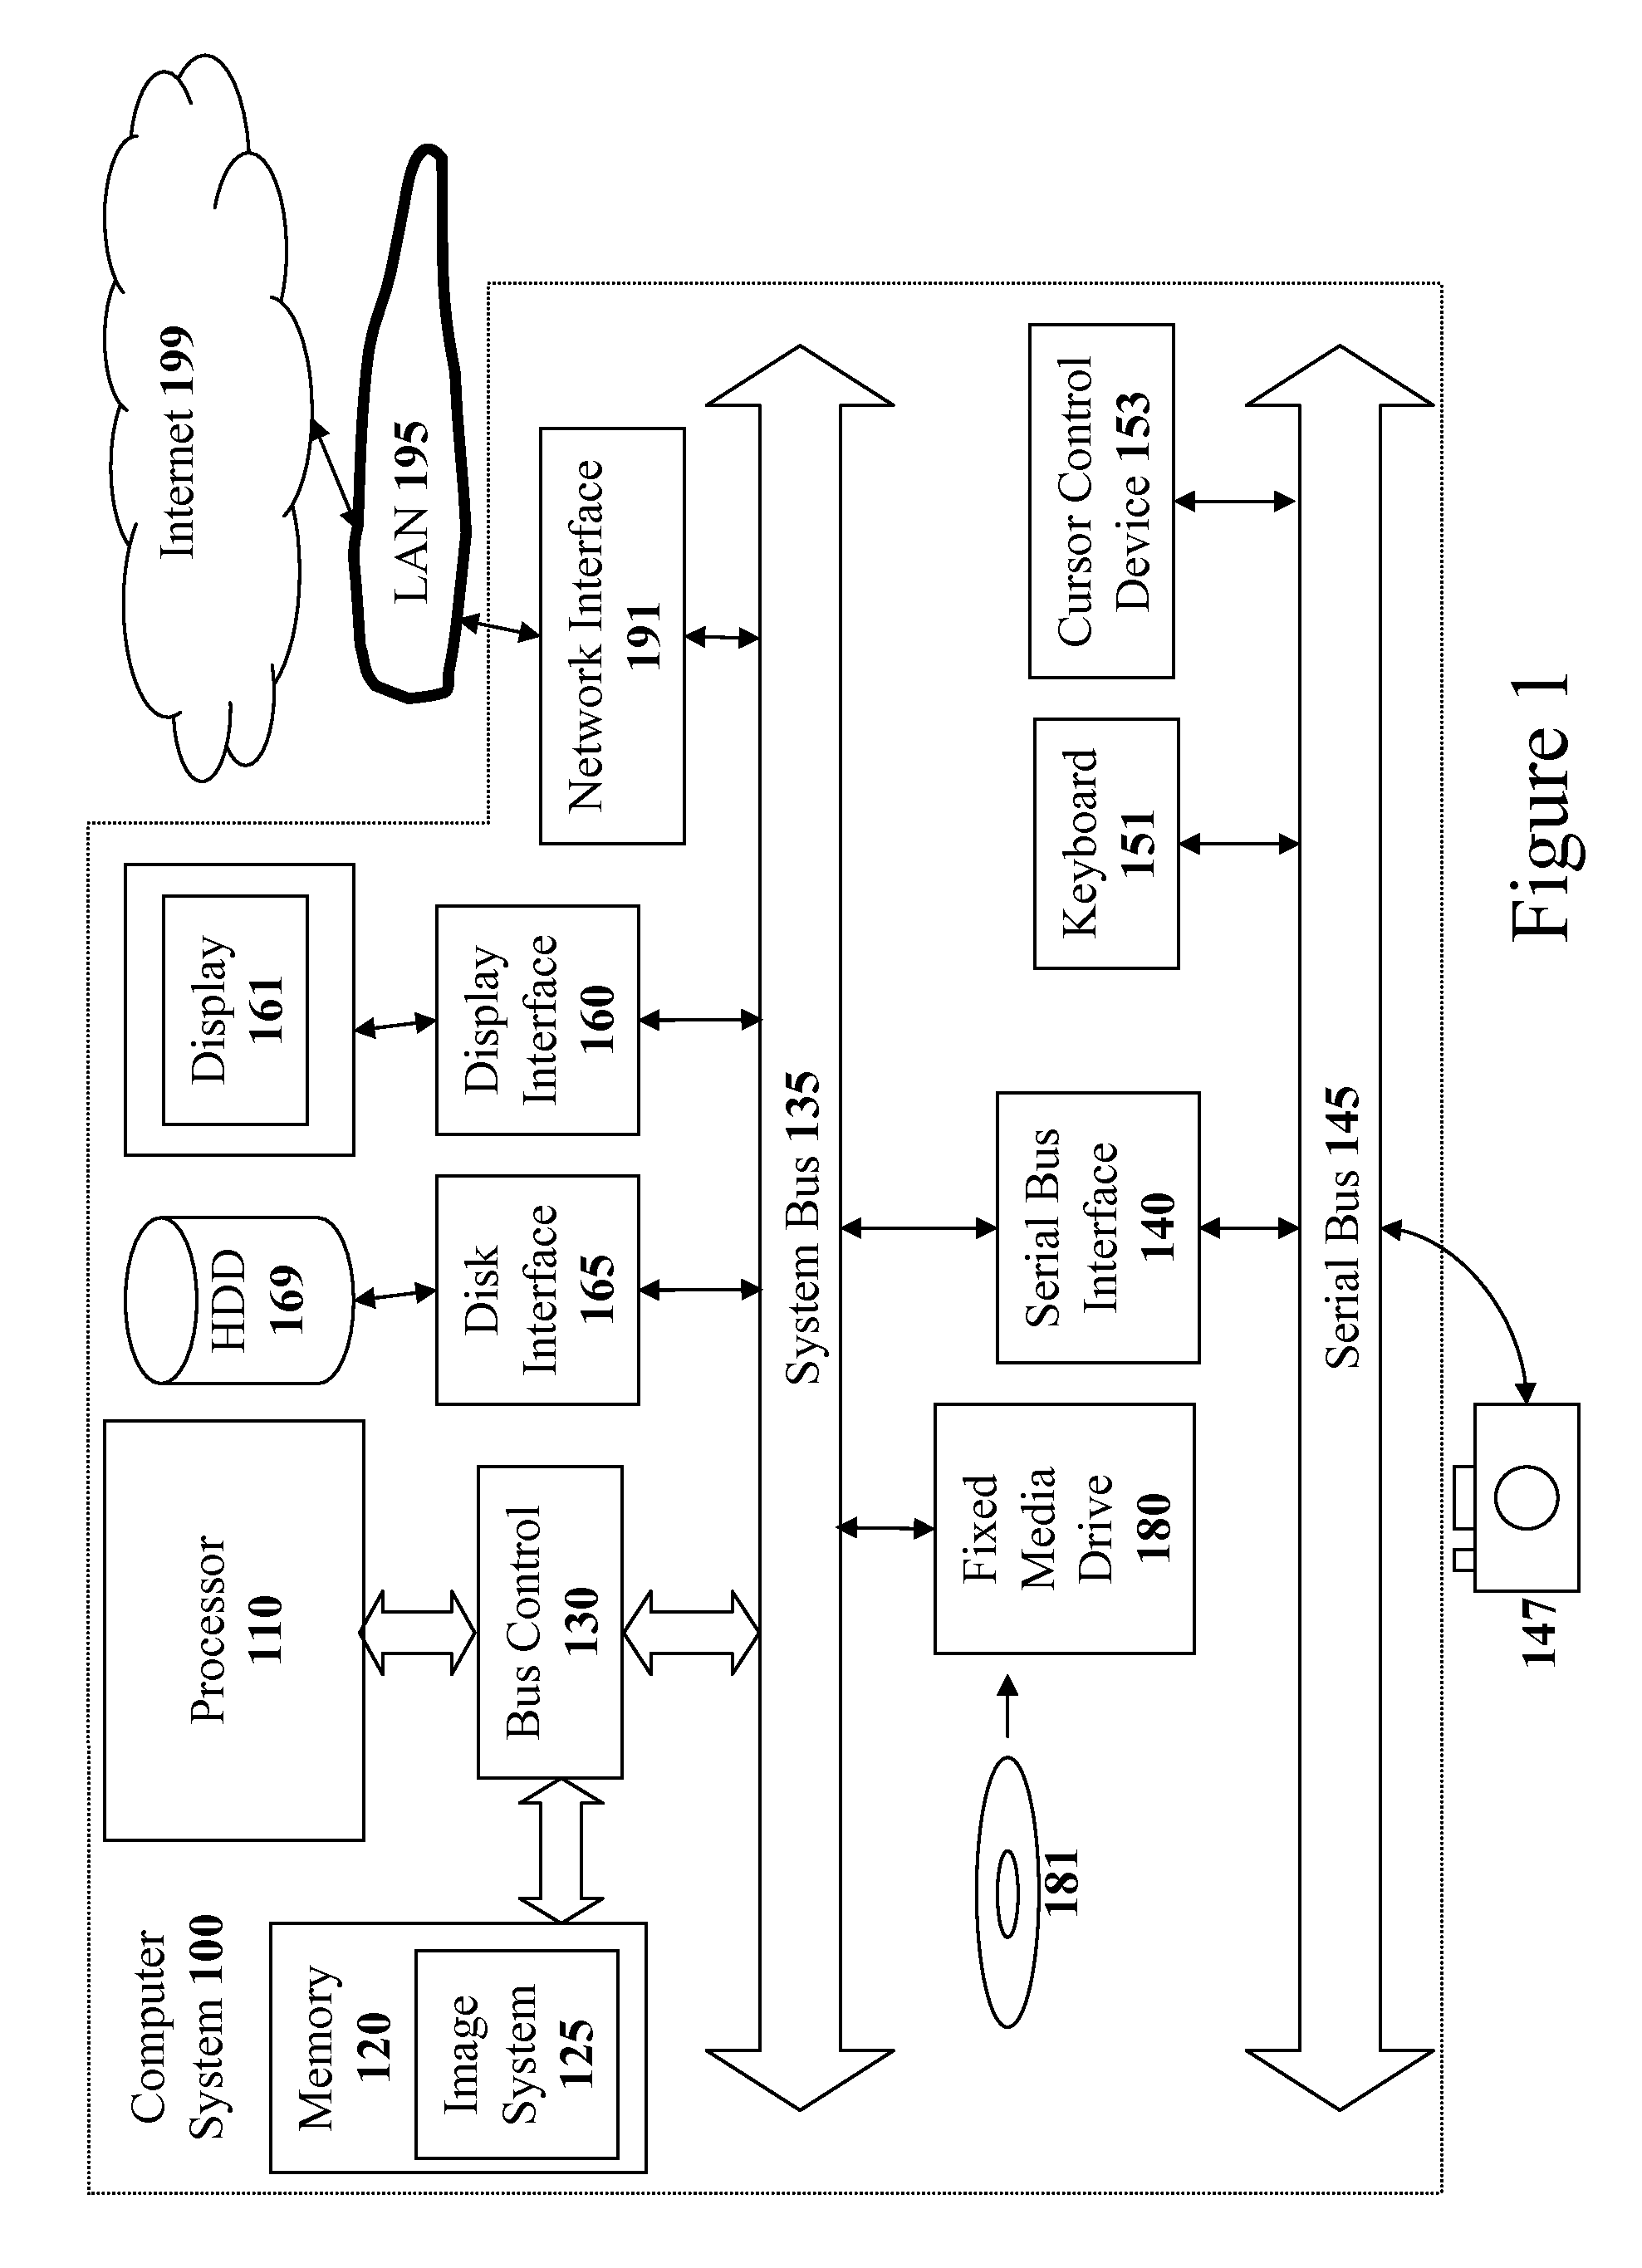 Method and Apparatus for An Intuitive Digital Image Processing System That Enhances Digital Images